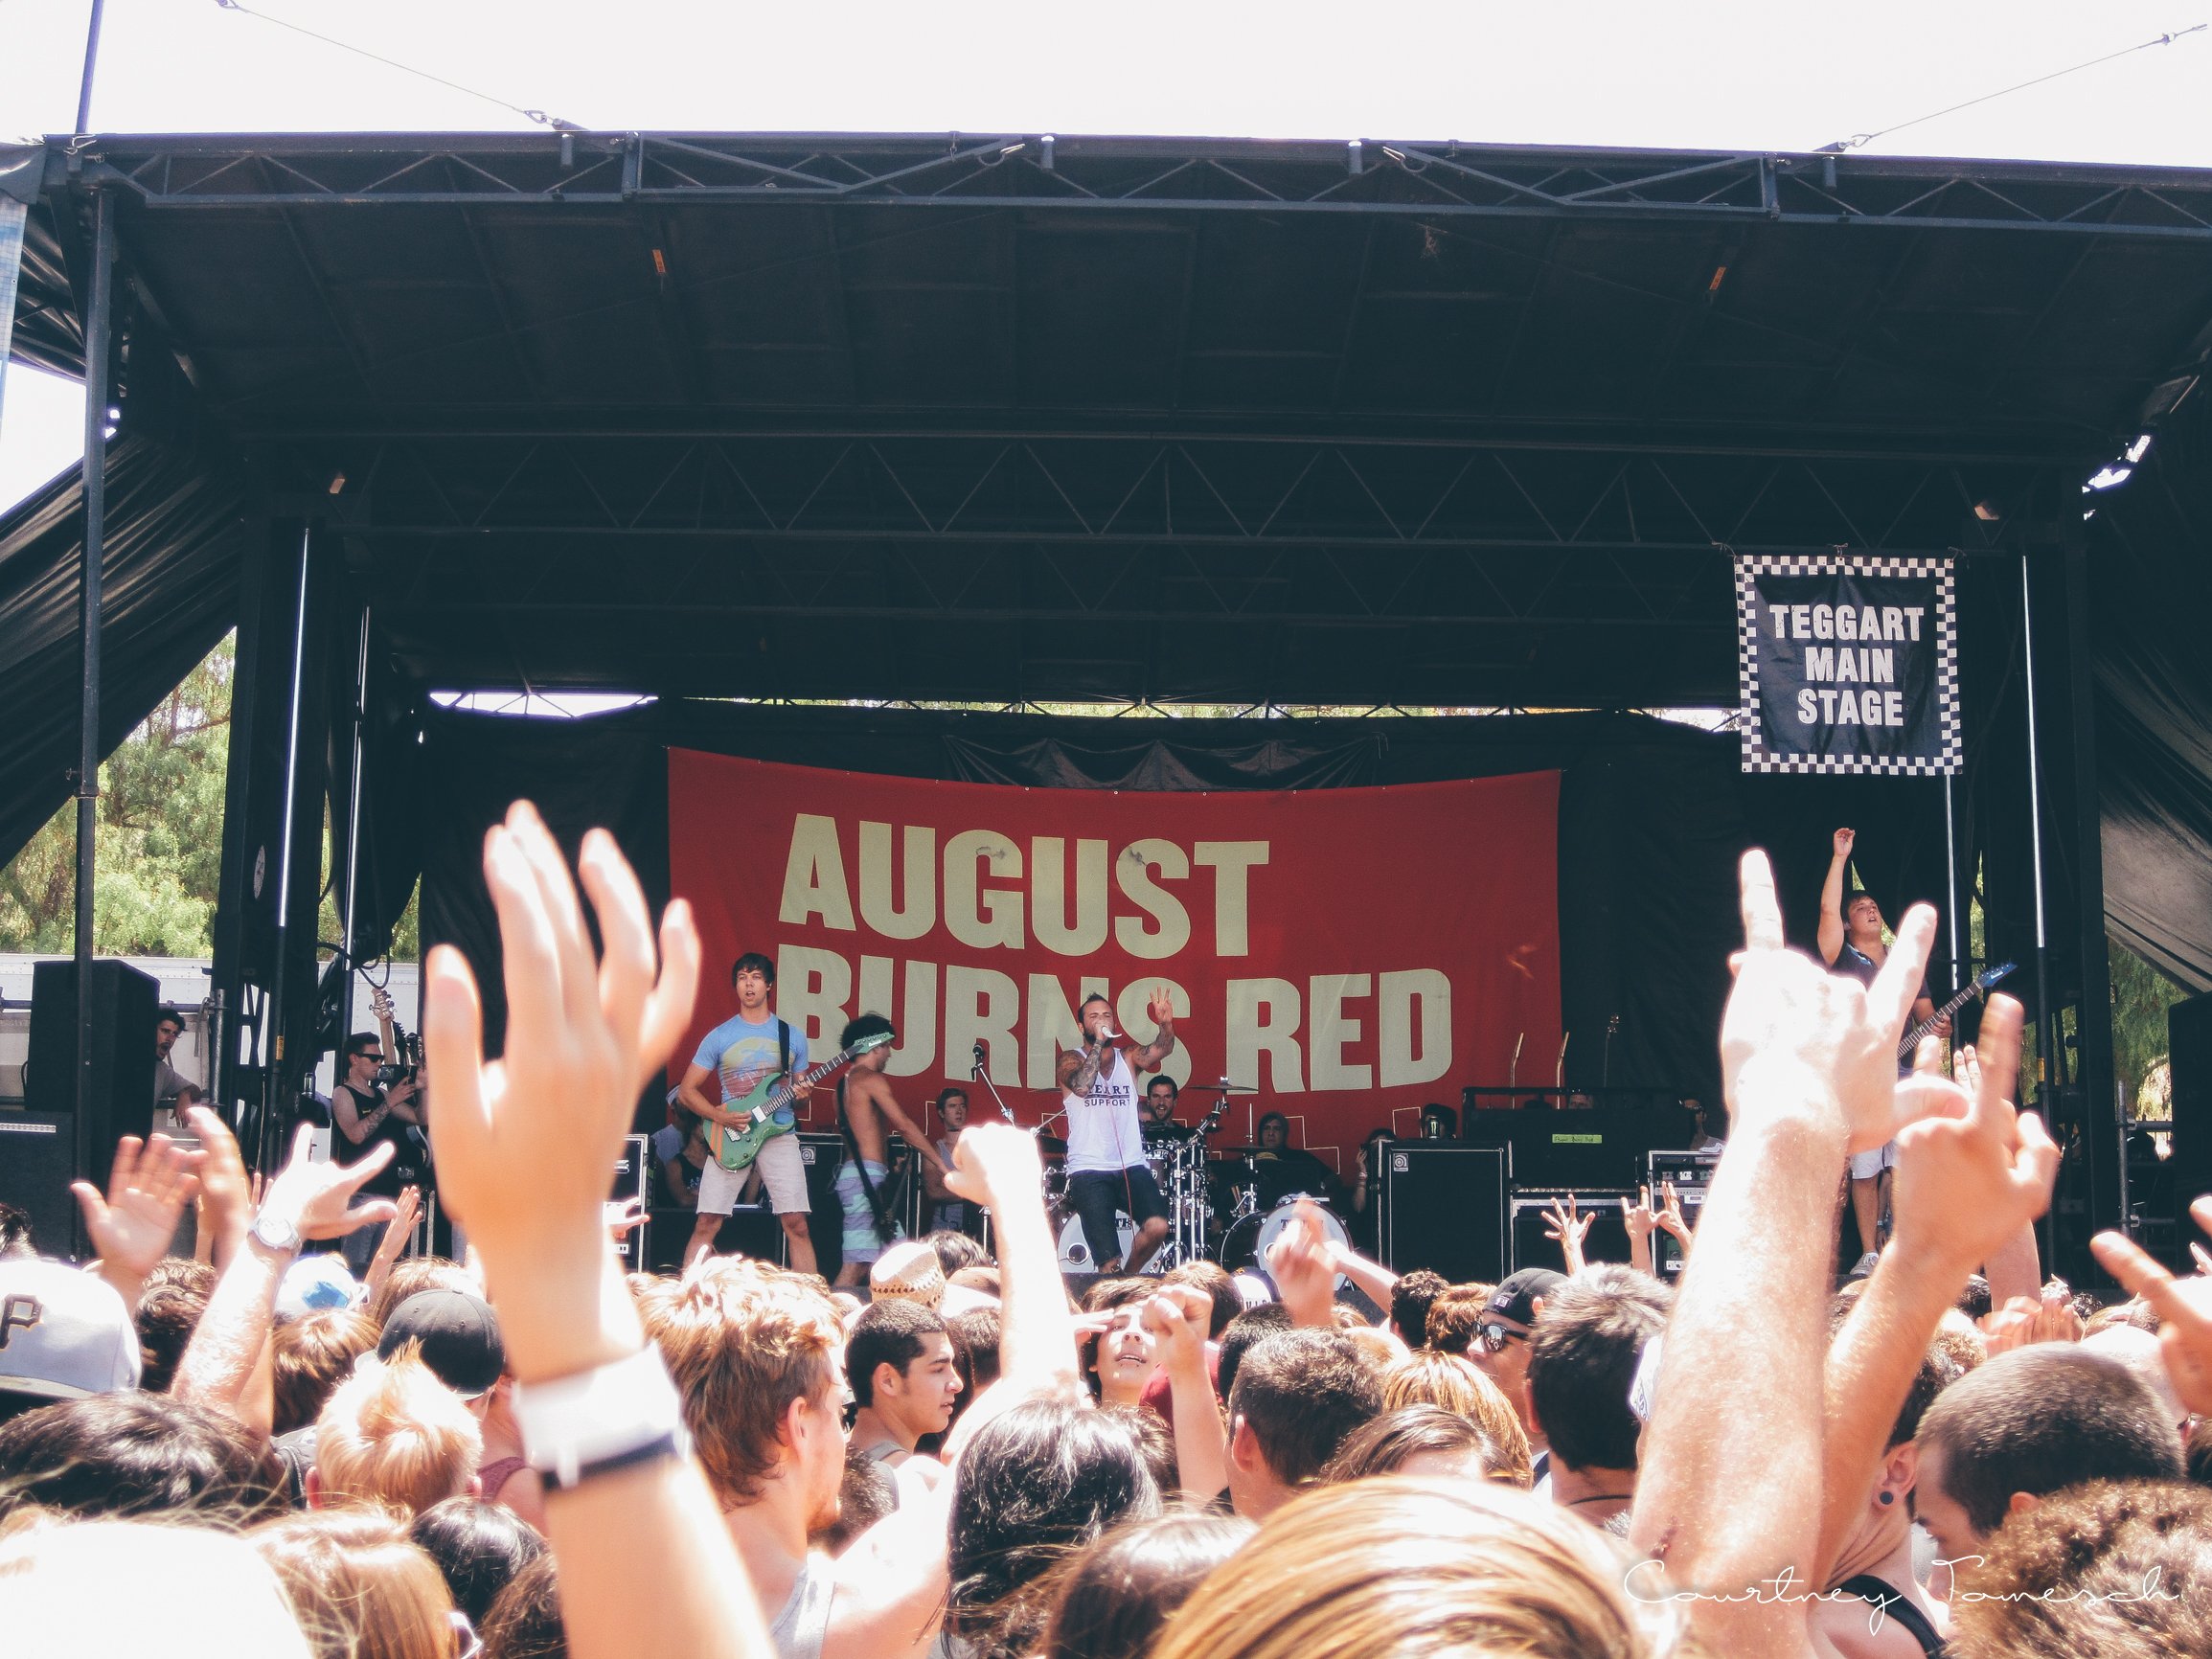 August Burns Red. They are still amazing and I still love them!